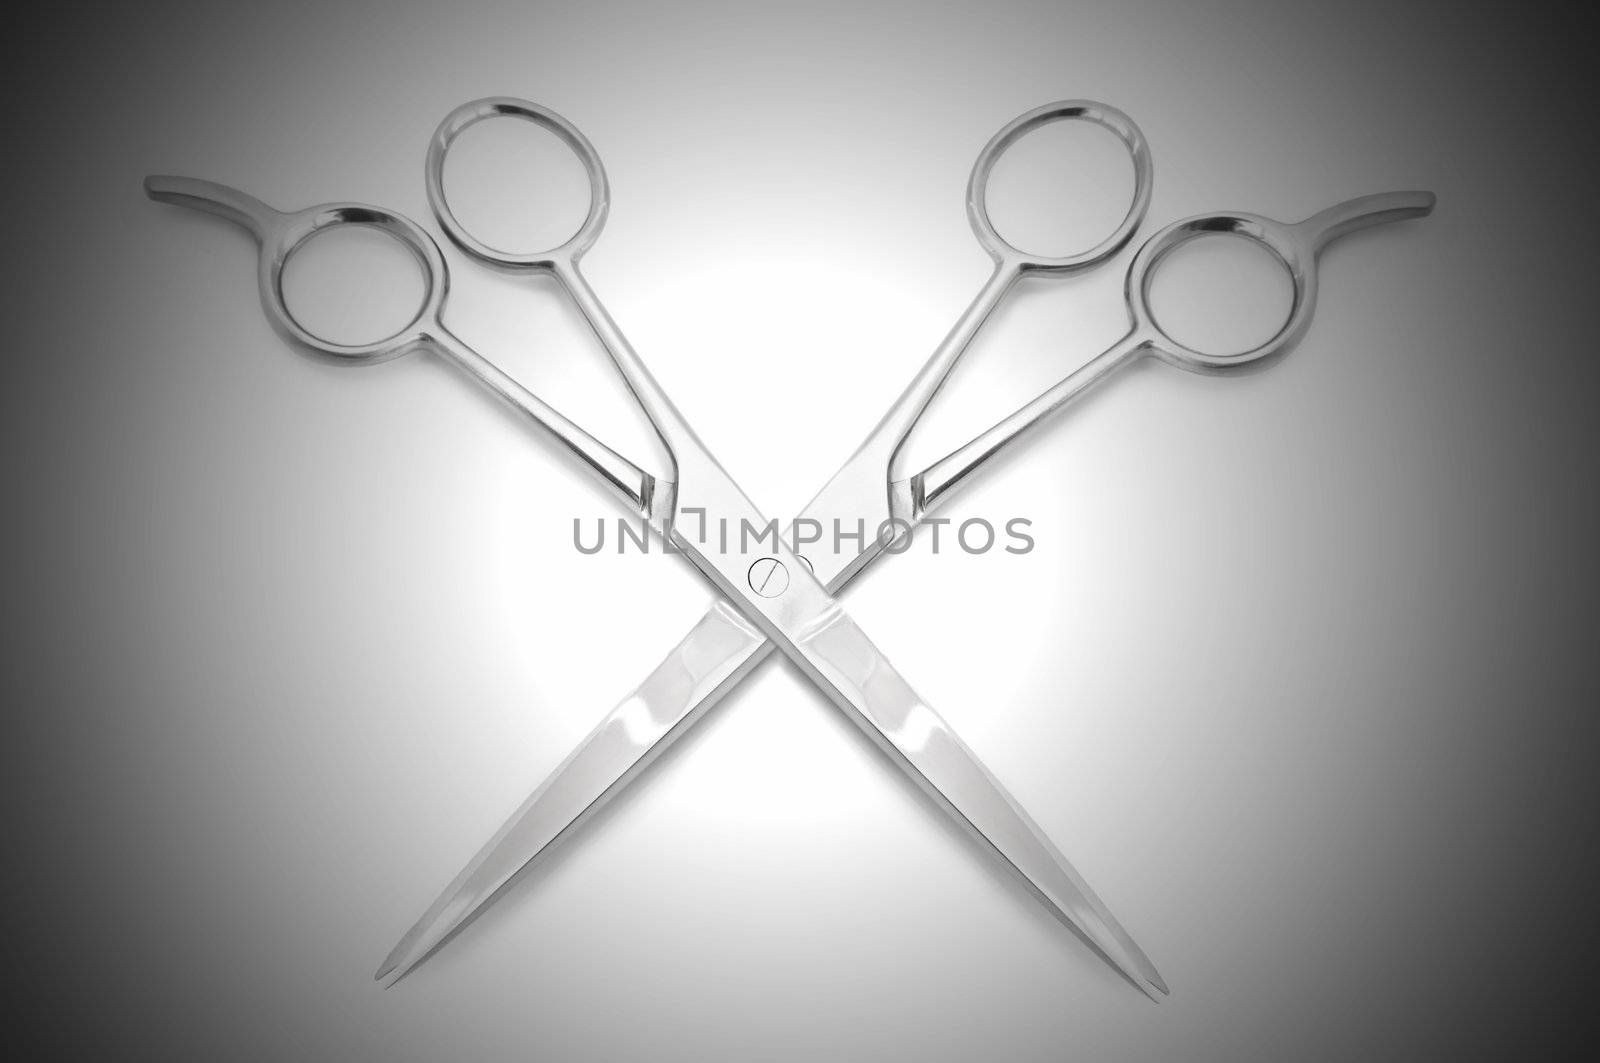 Two stainless steel hairdressing scissors overlapping each other against a white and grey light effect background